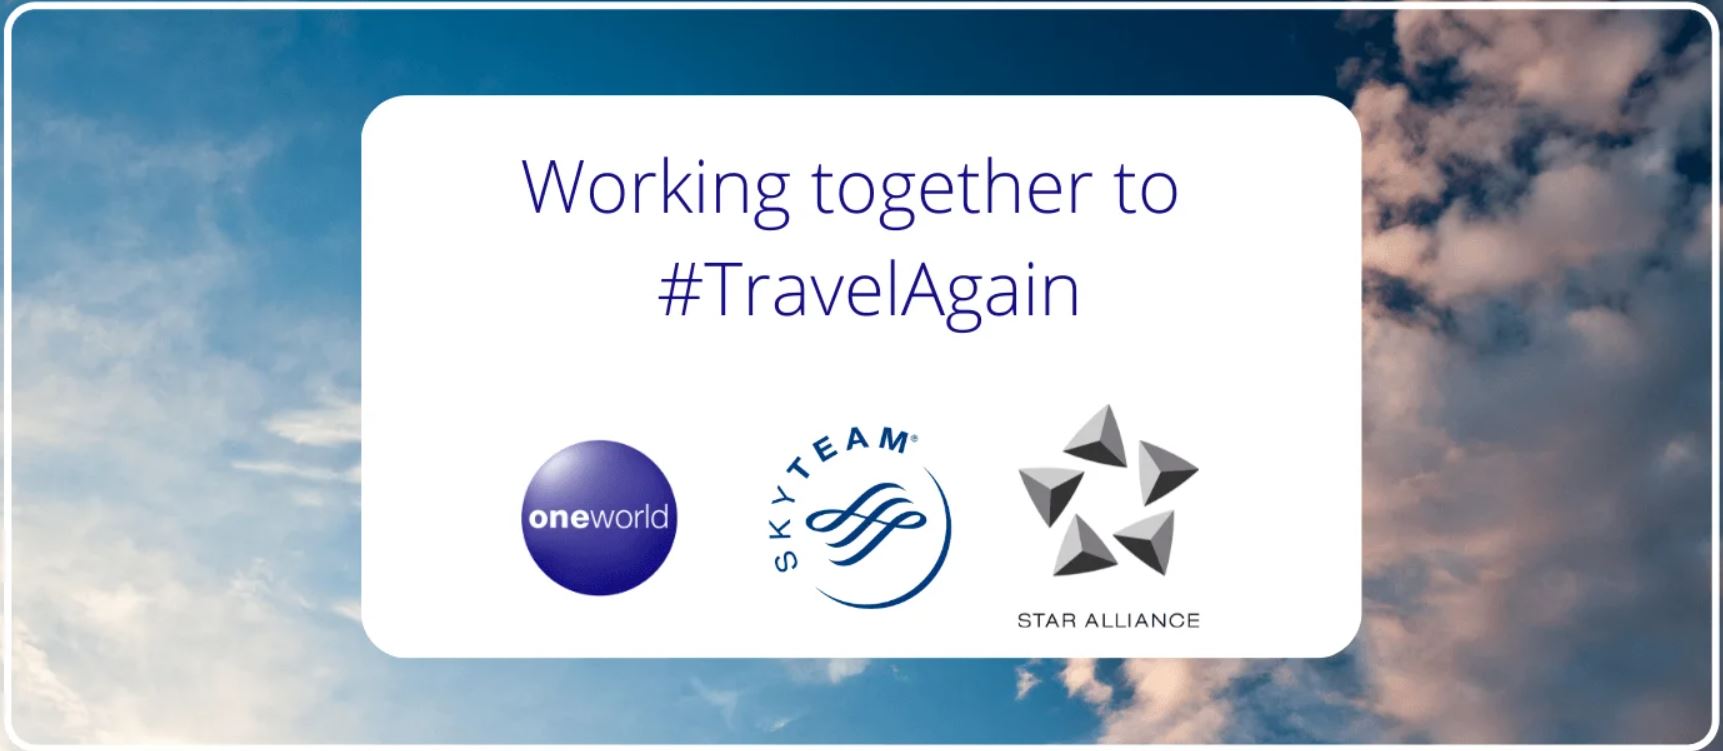 oneworld, SkyTeam and Star Alliance Urge Universal Travel Standards – Working Together to Travel Again